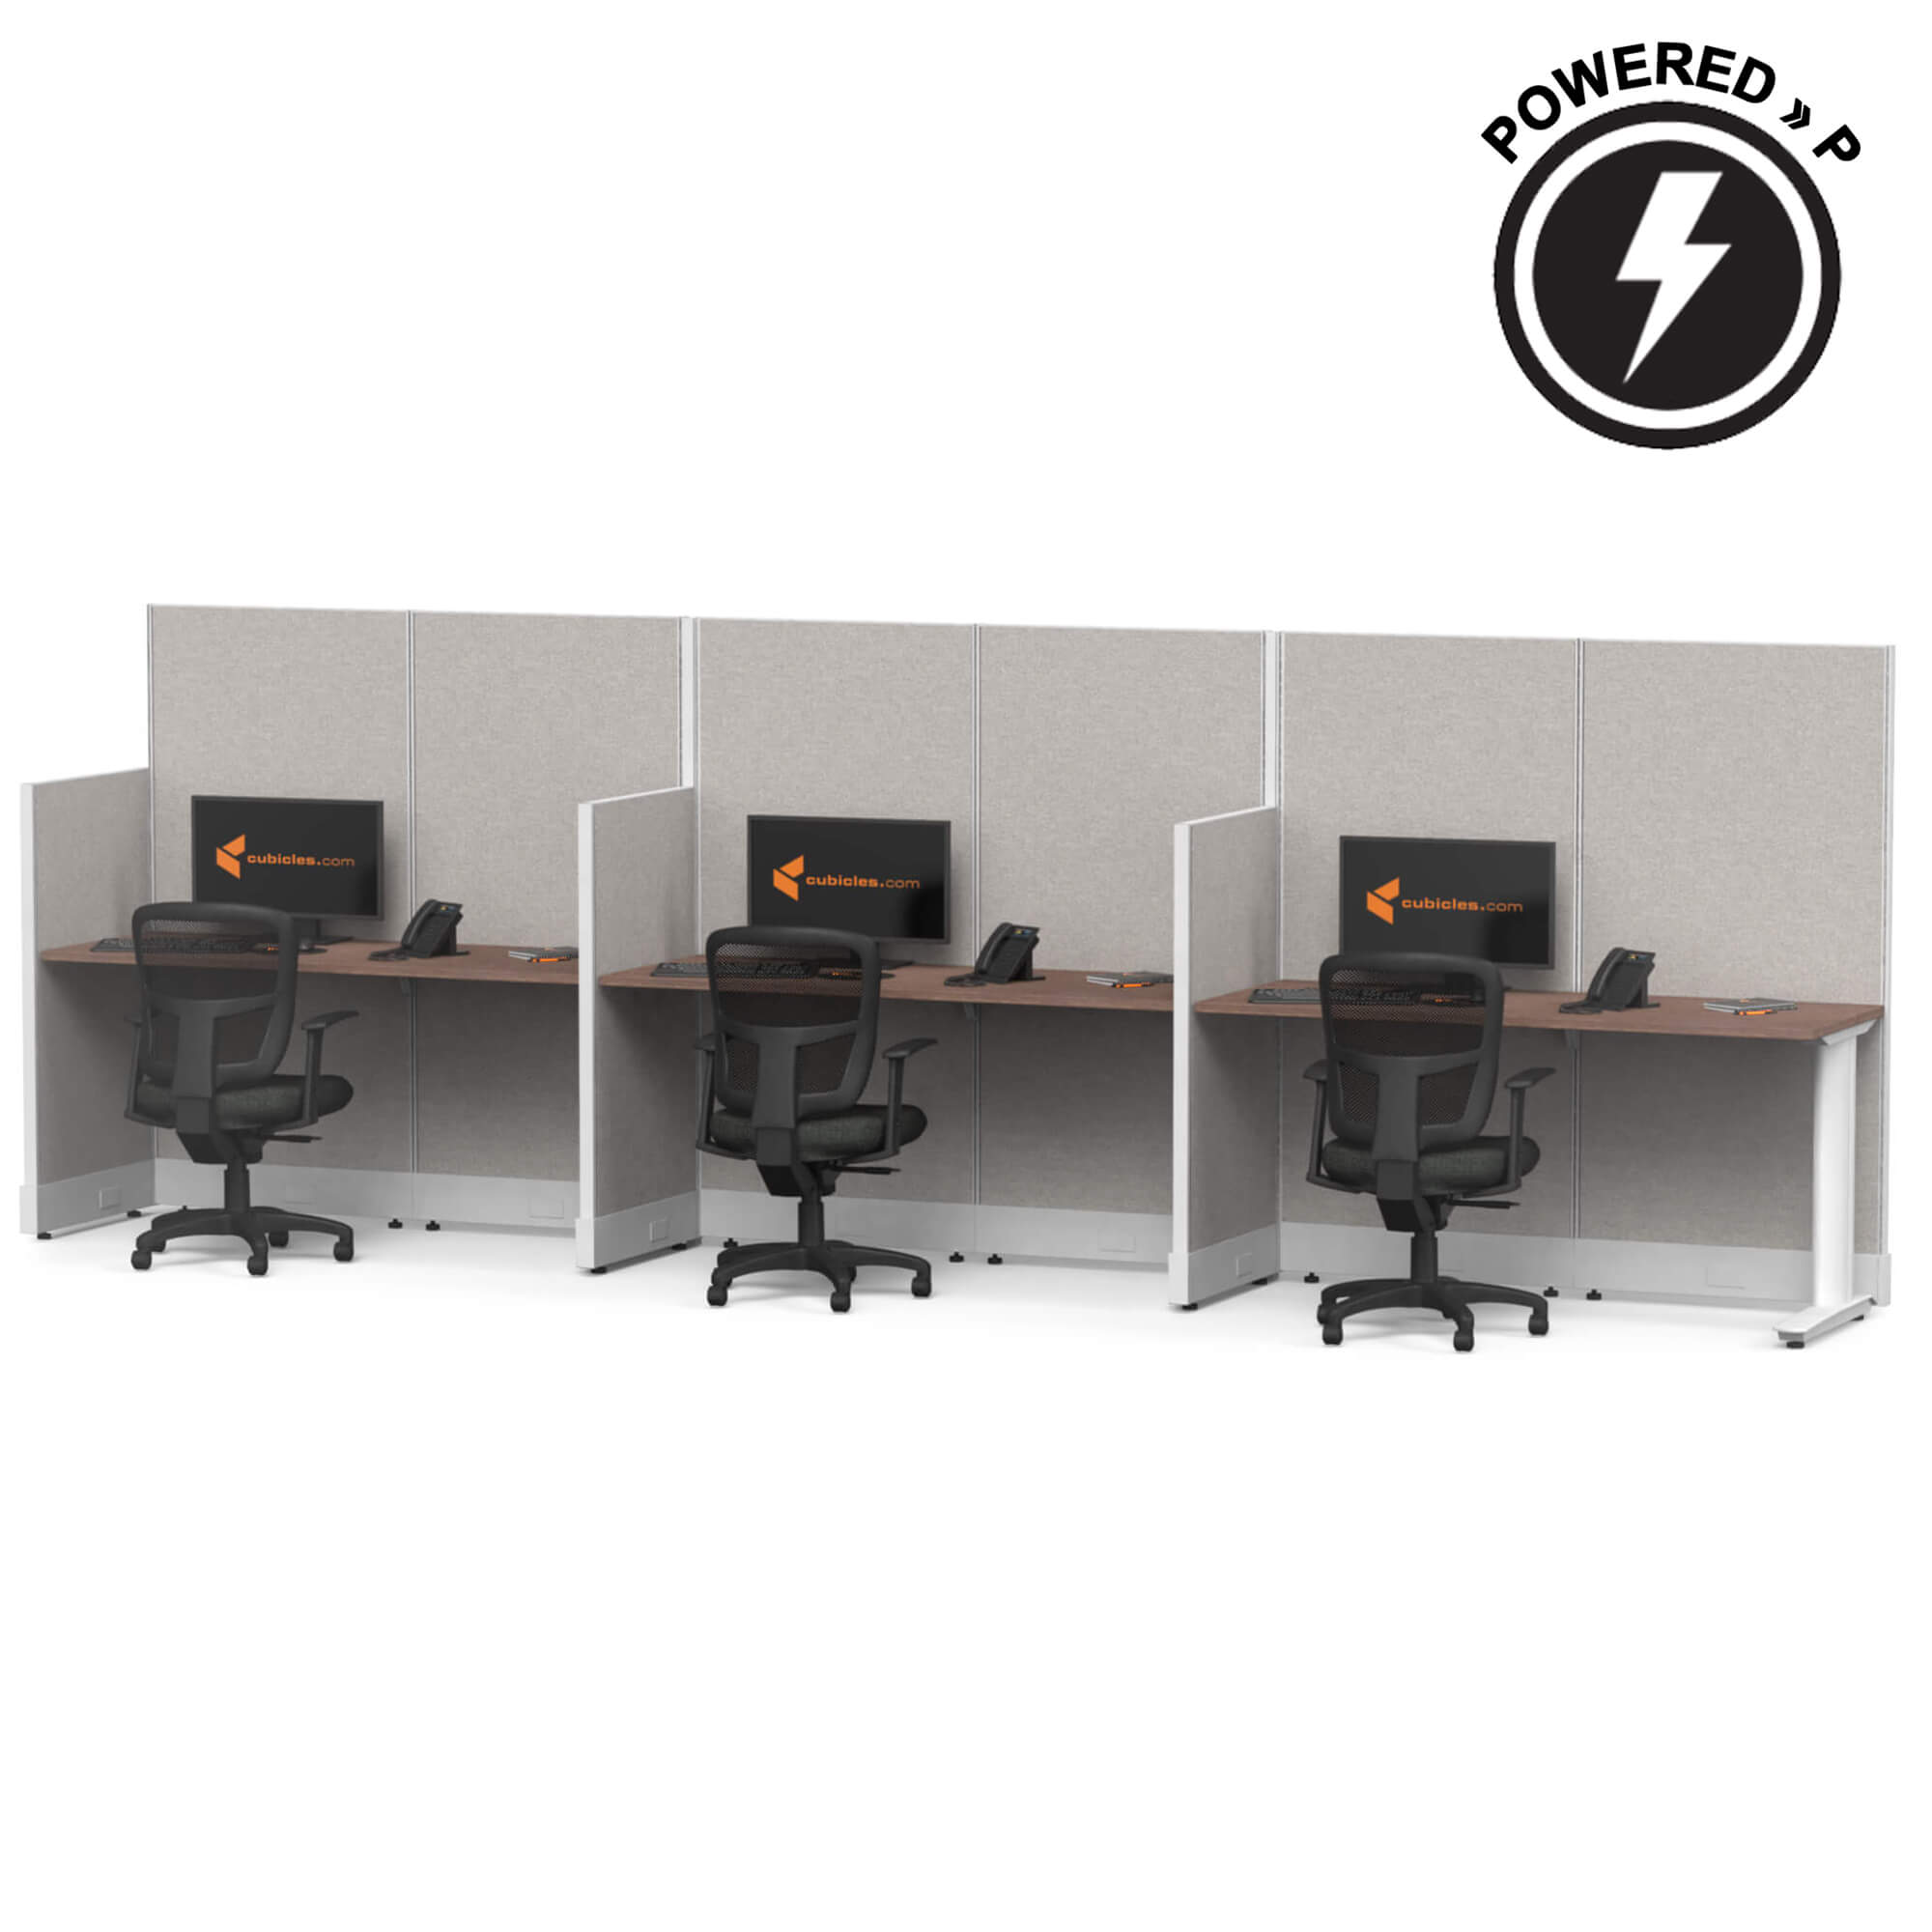 cubicle-desk-straight-workstation-3pack-inline-powered-sign-1-2.jpg